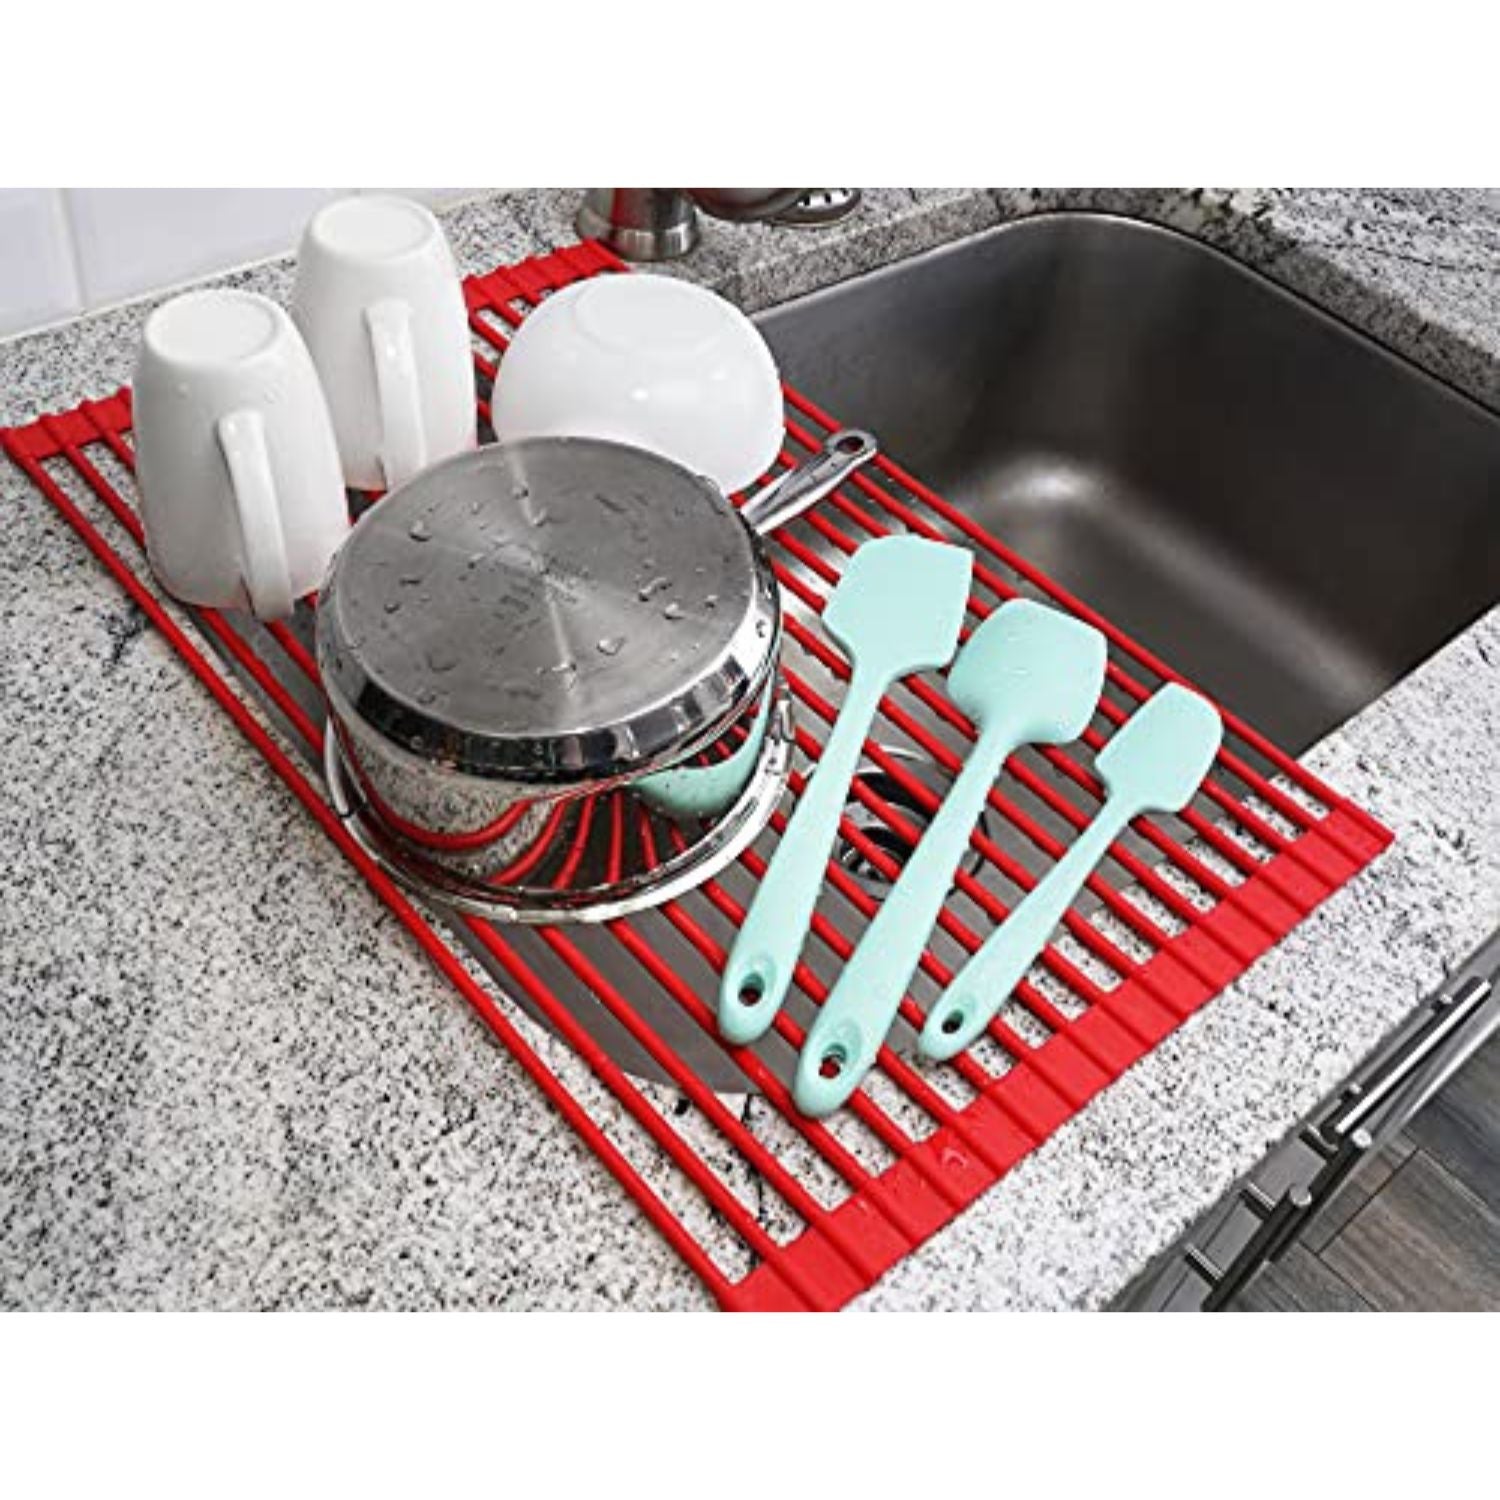 Zulay 20.5” x 13” Roll Up Drying Rack - Silicone-Coated Stainless Steel  Over Sink Dish Drying Rack - Multipurpose Foldable Sink Rack for Kitchen